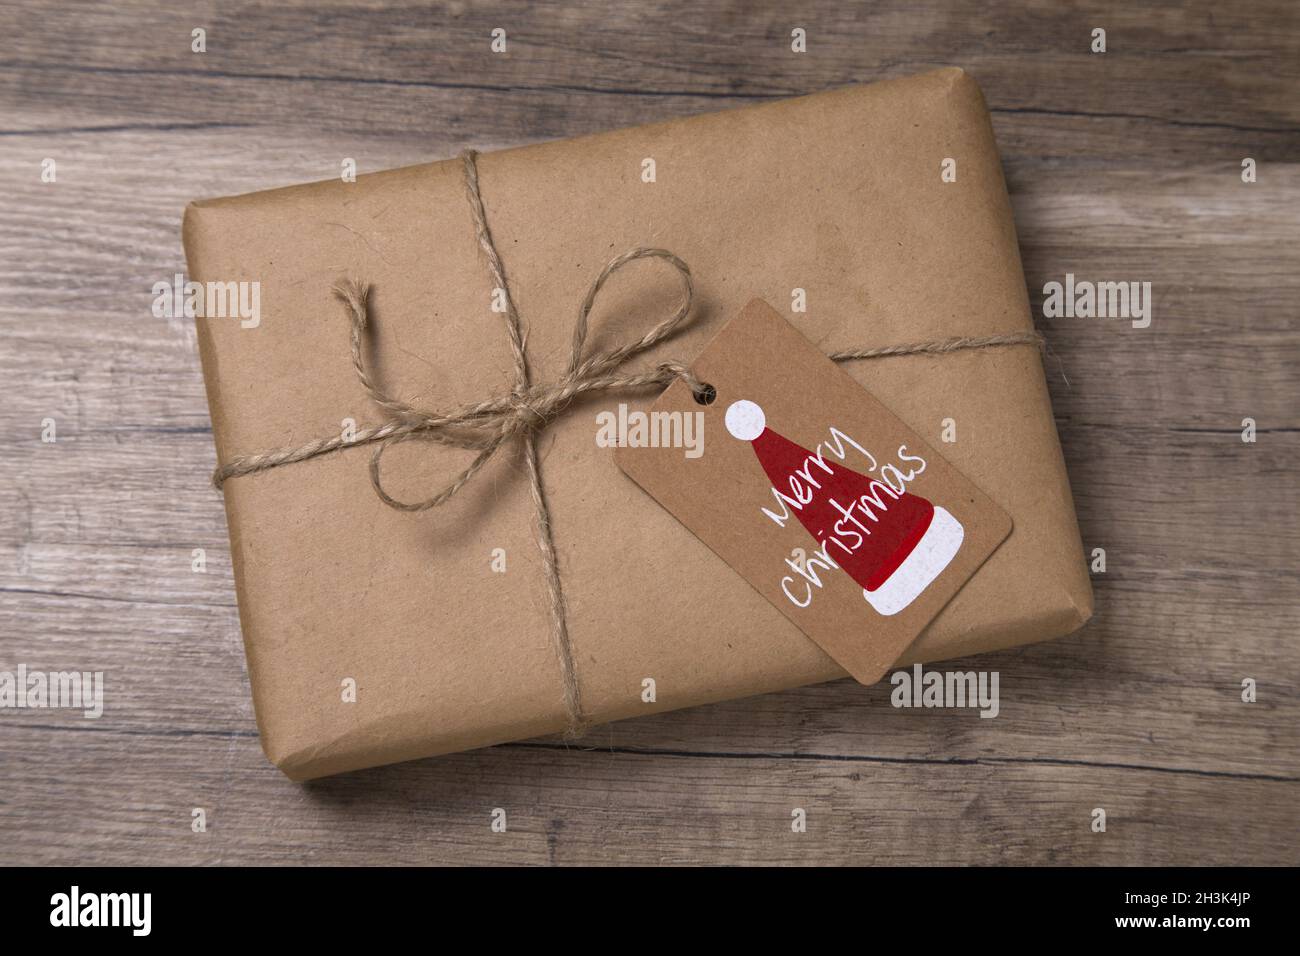 Christmas or New Year gift box wrapped in kraft paper with blank gift tag on old wooden background. Stock Photo